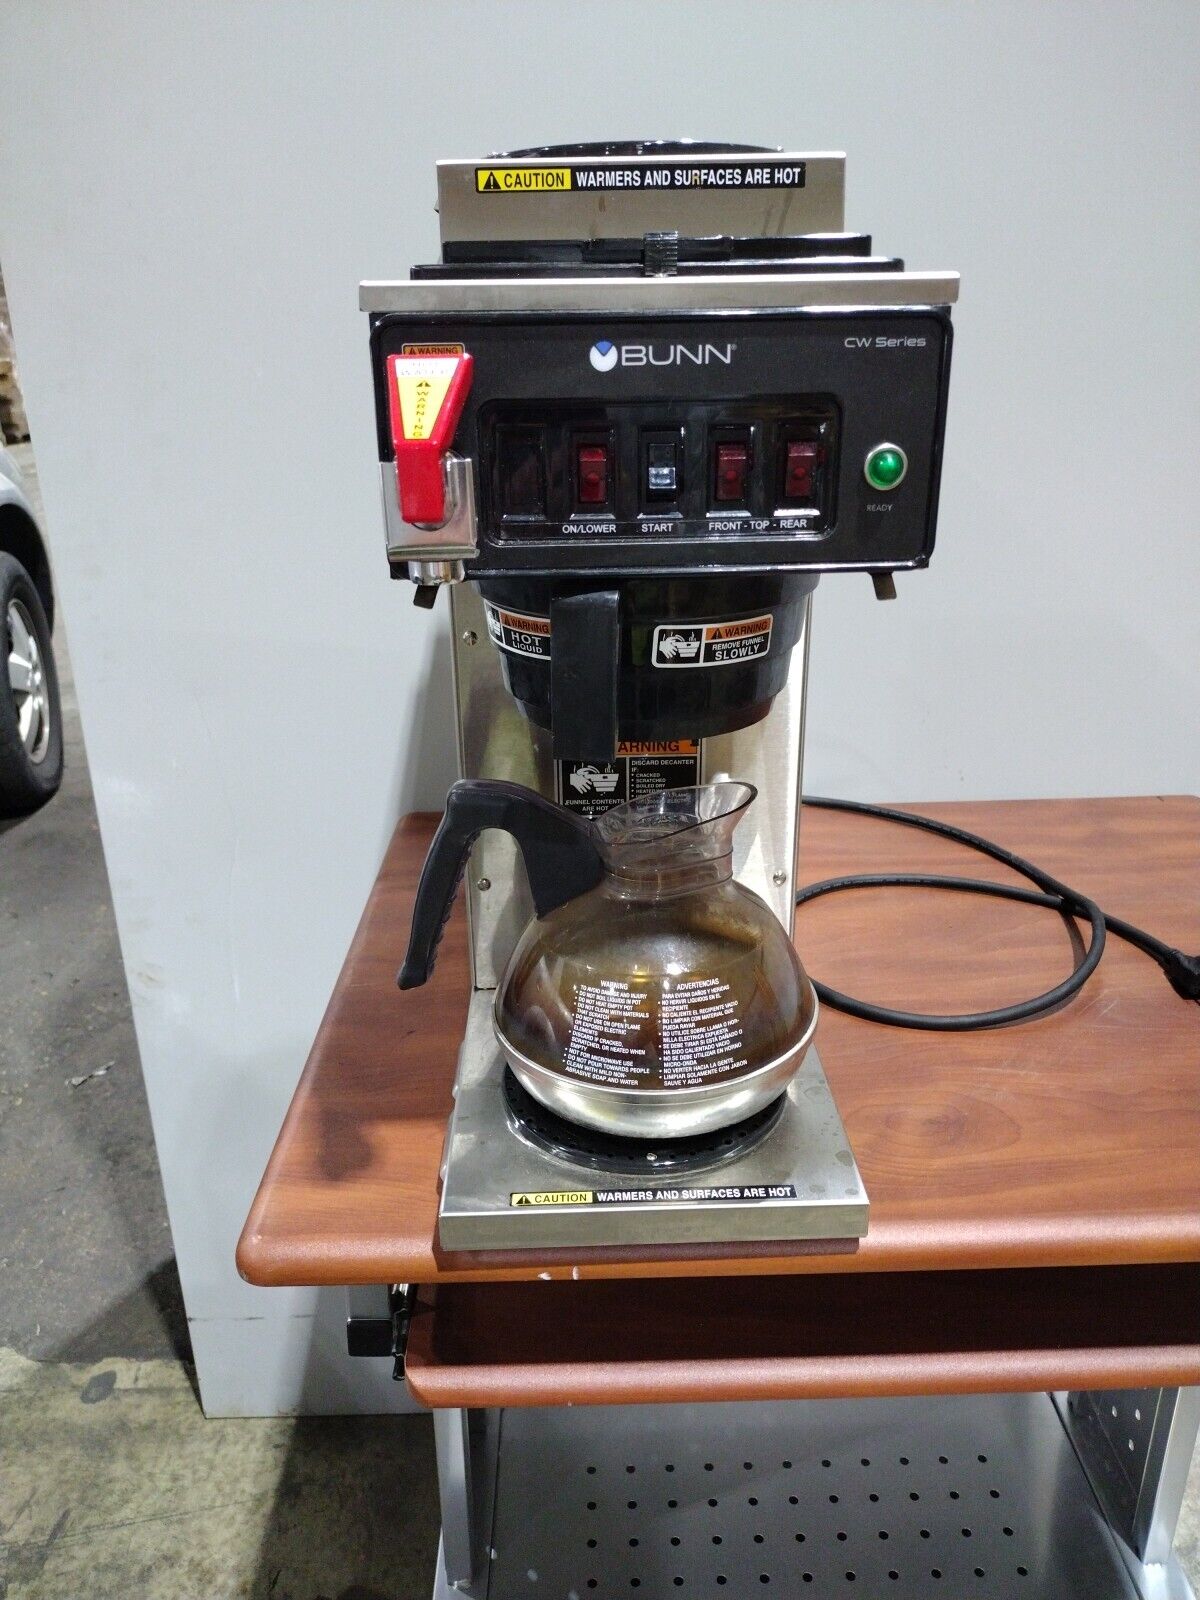 BUNN 12950.0212 CWTF15-3 Automatic Commercial Coffee Brewer with 3 Lower Warmers